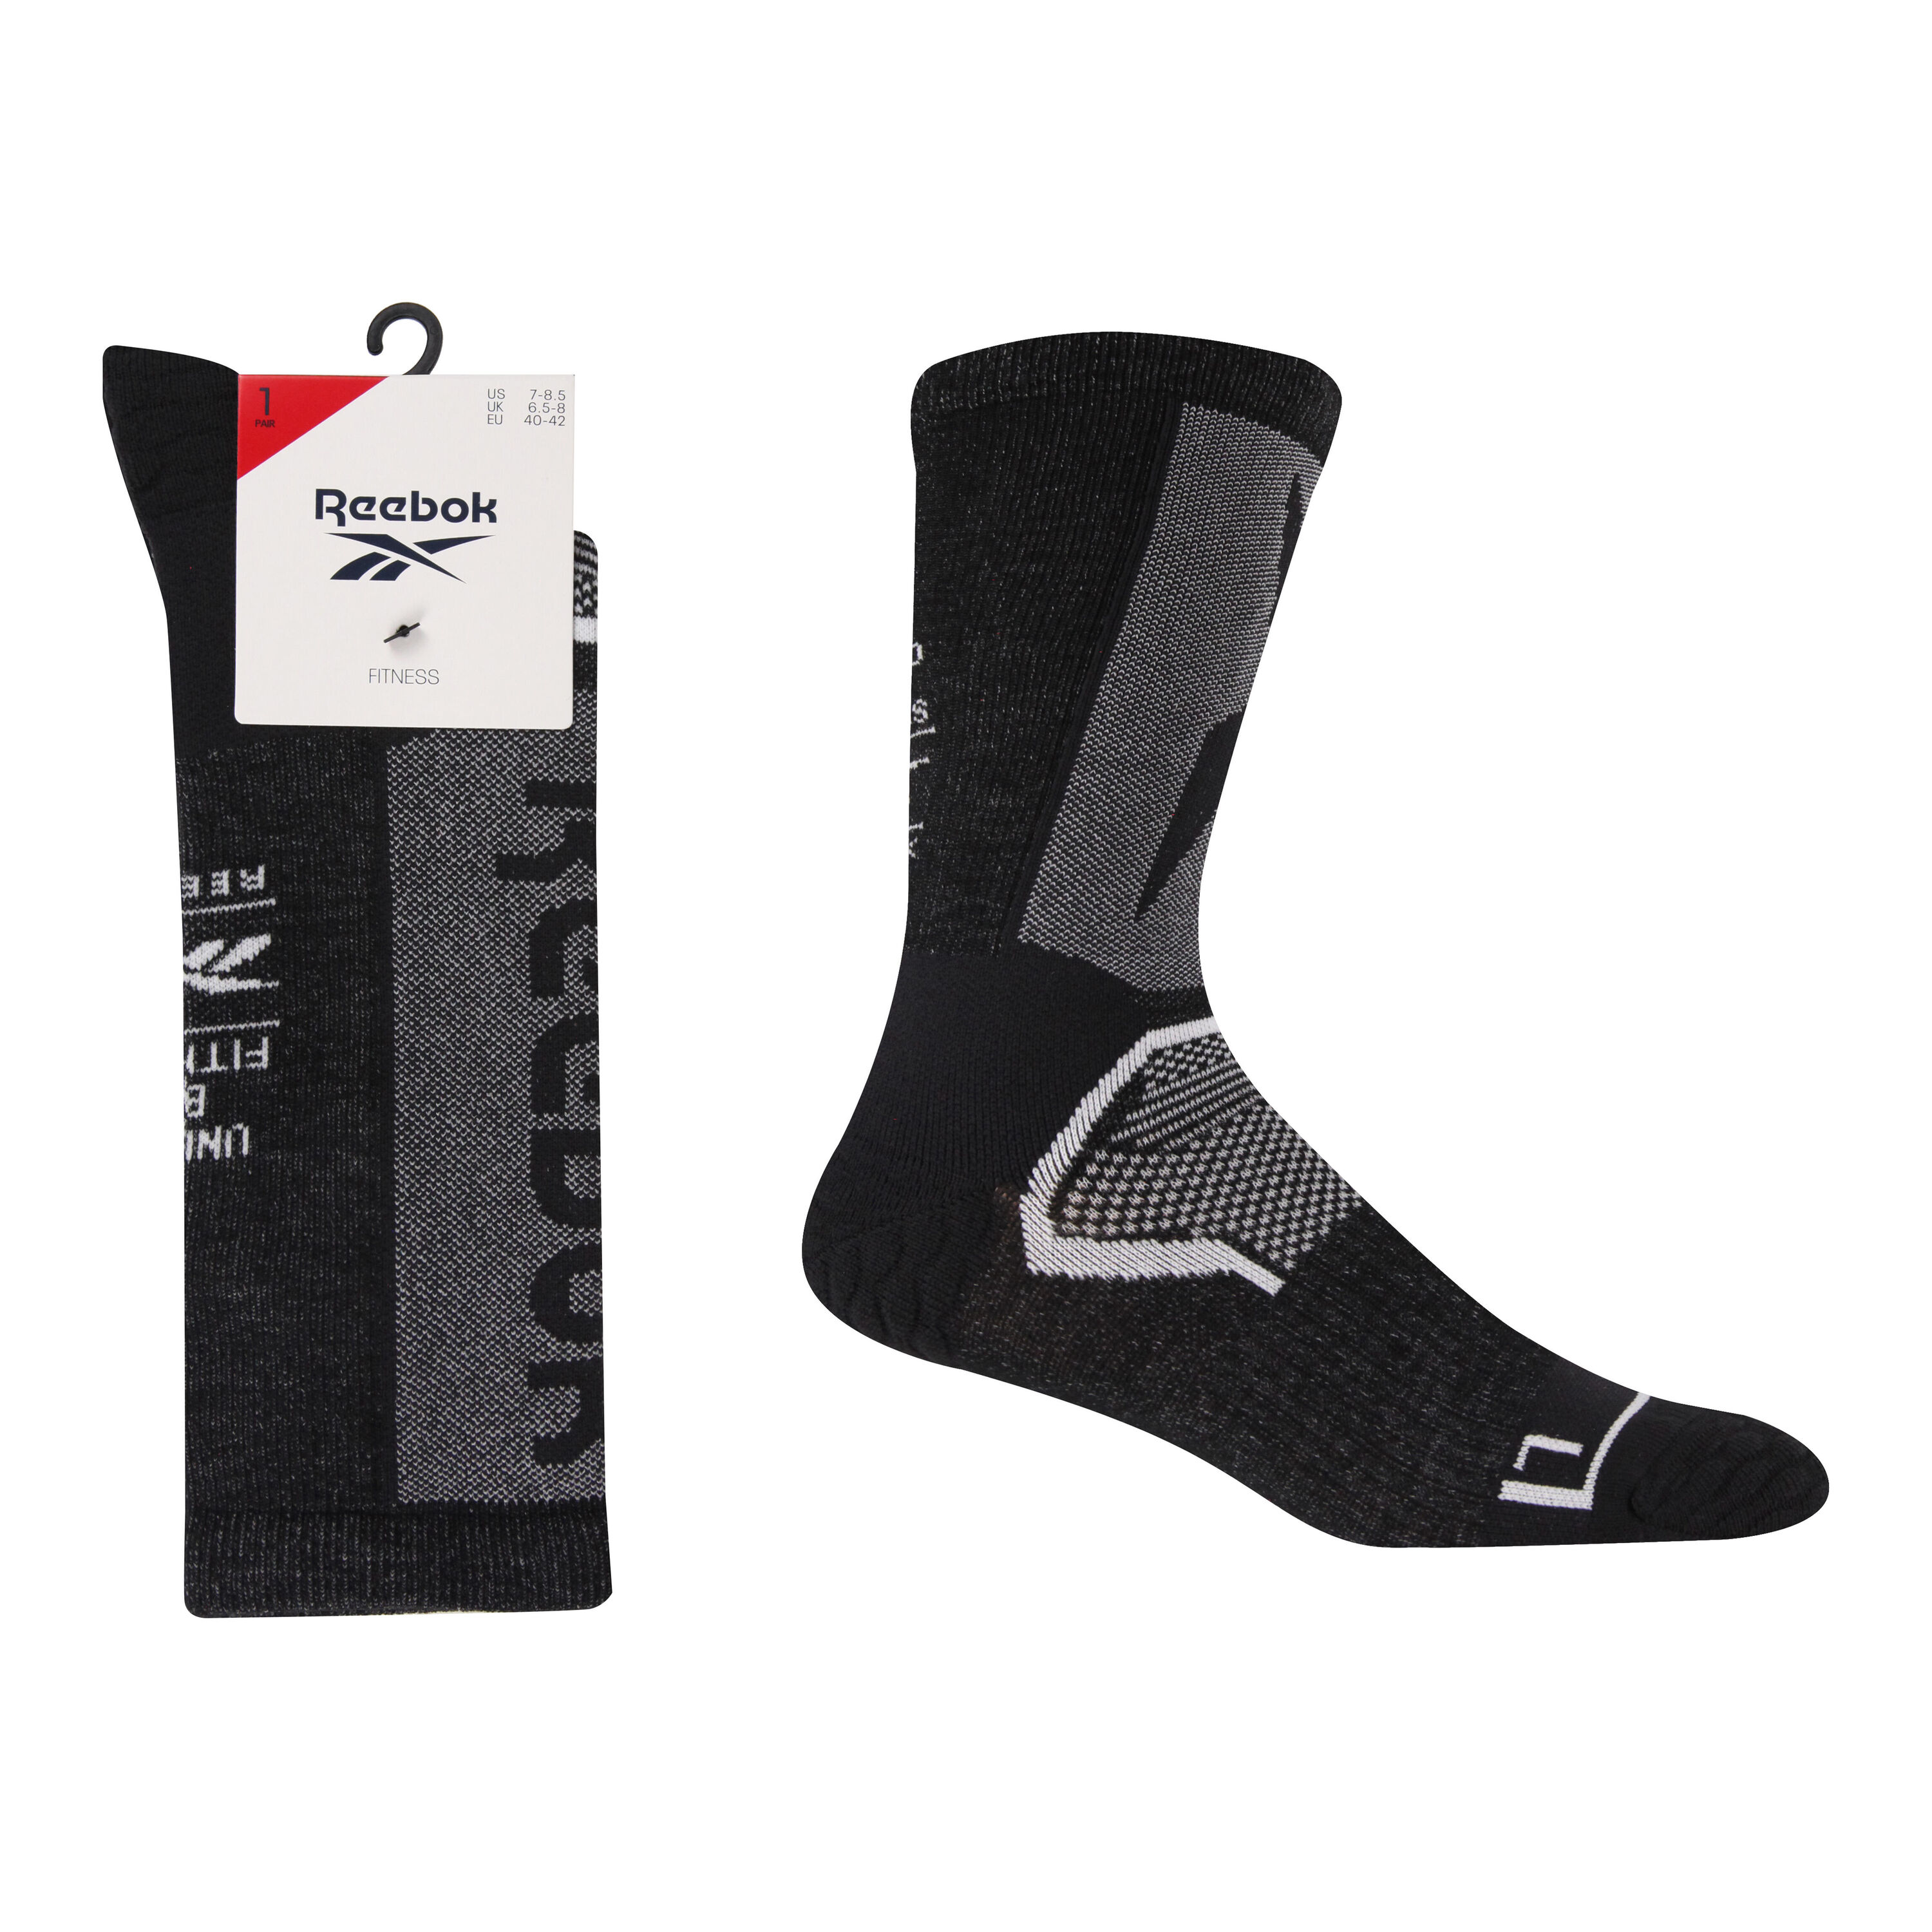 REEBOK 1 Pk Longer Length Socks With Full Elastic Compession, Mesh Panels, Arch Support